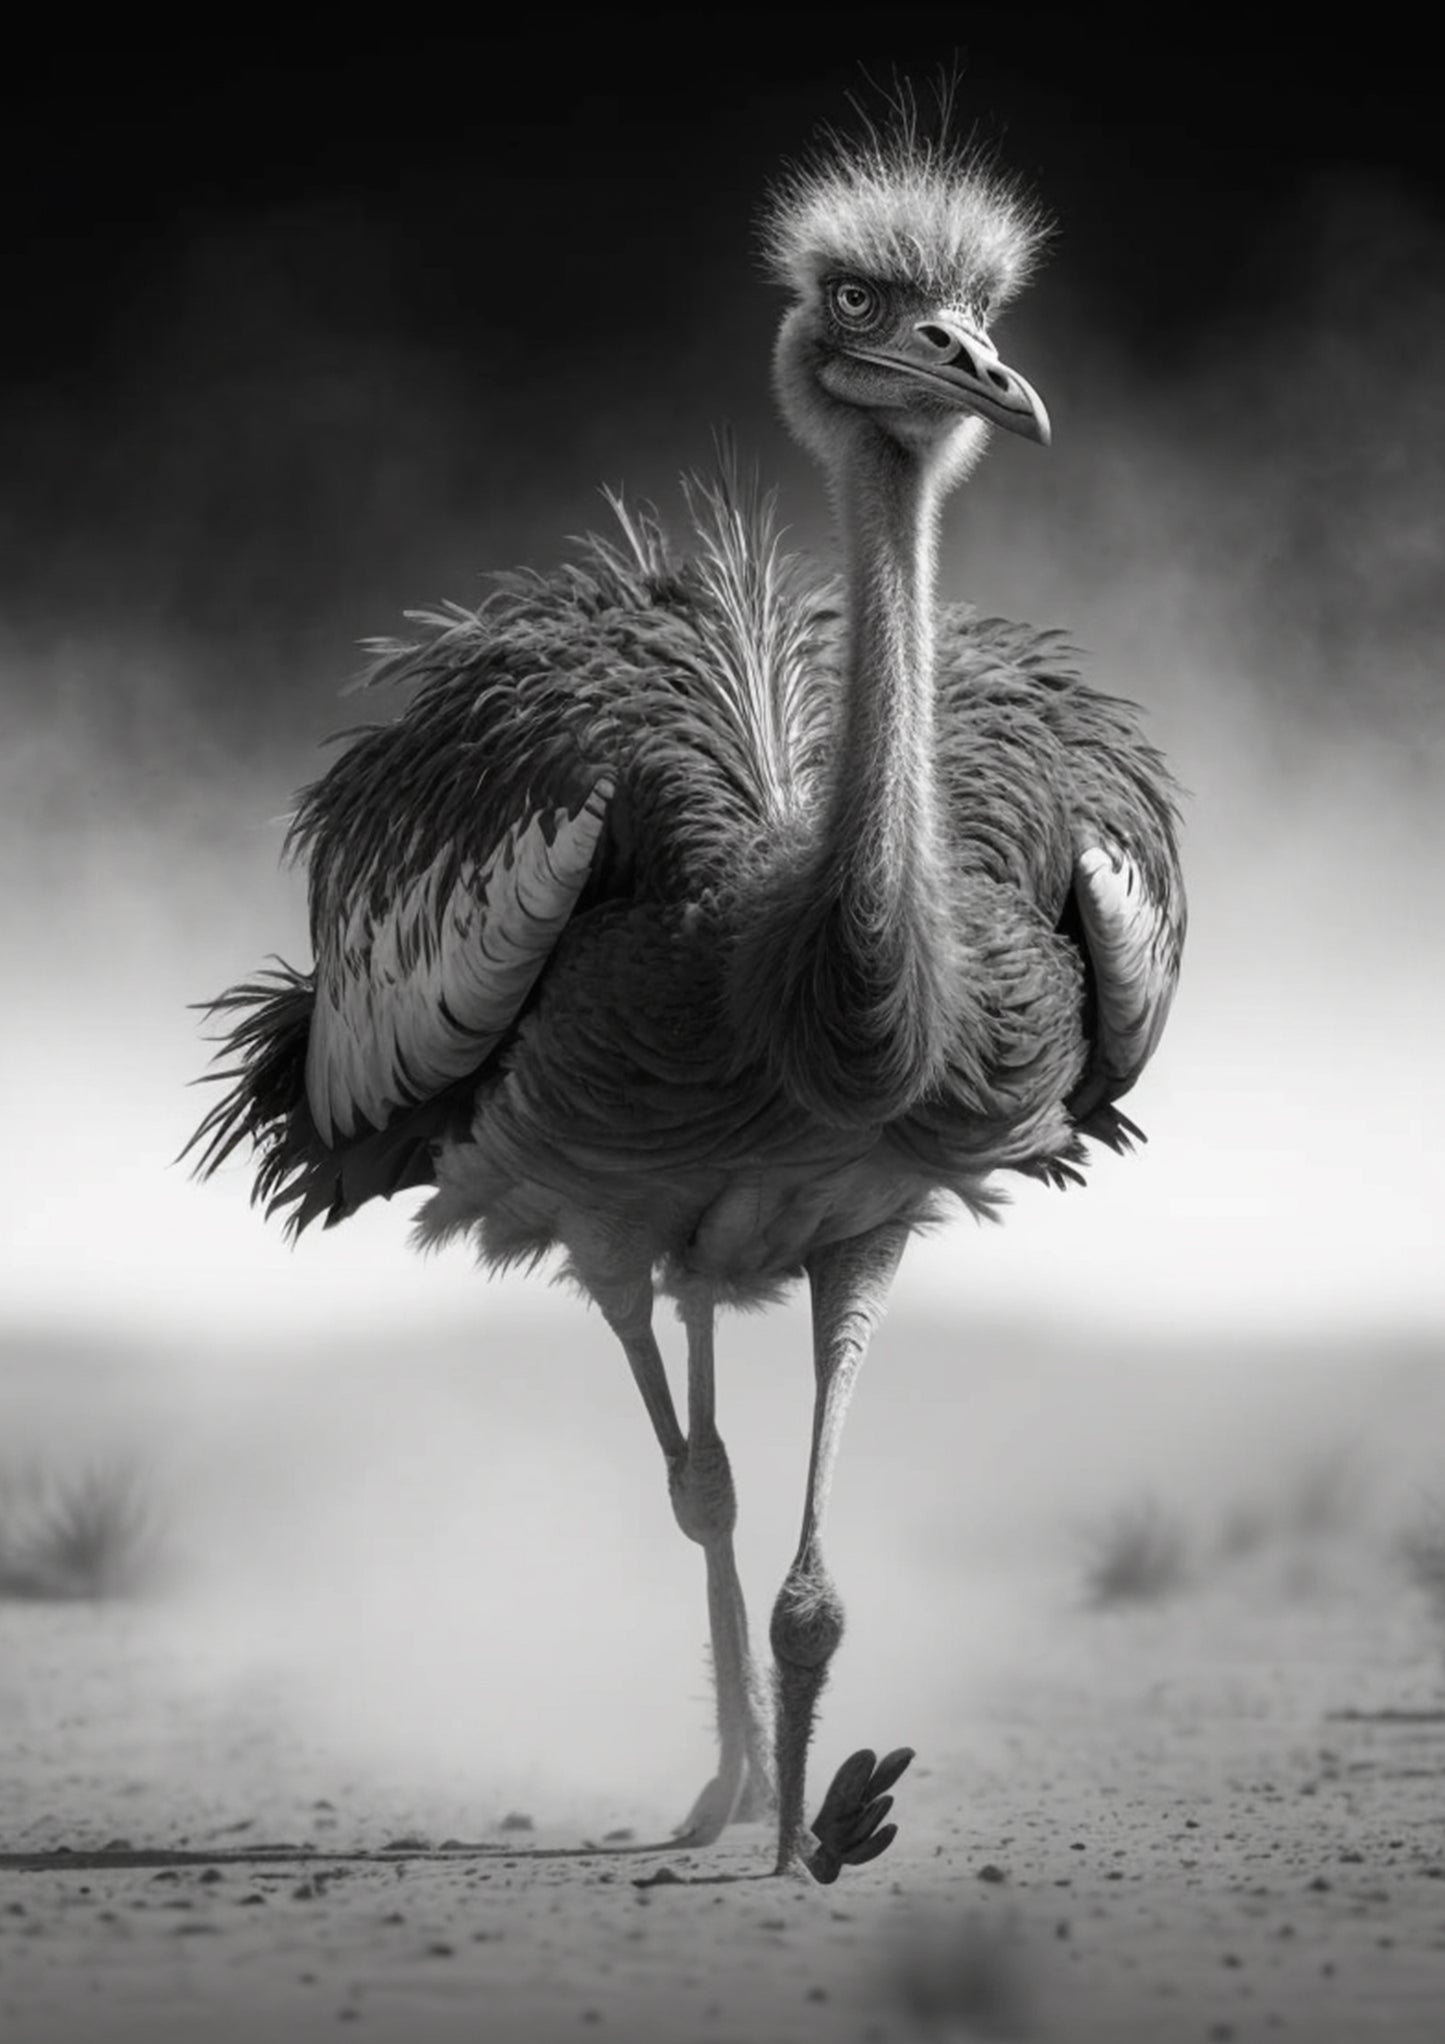 The monochrome wild animal’s collection - the charging Ostrich